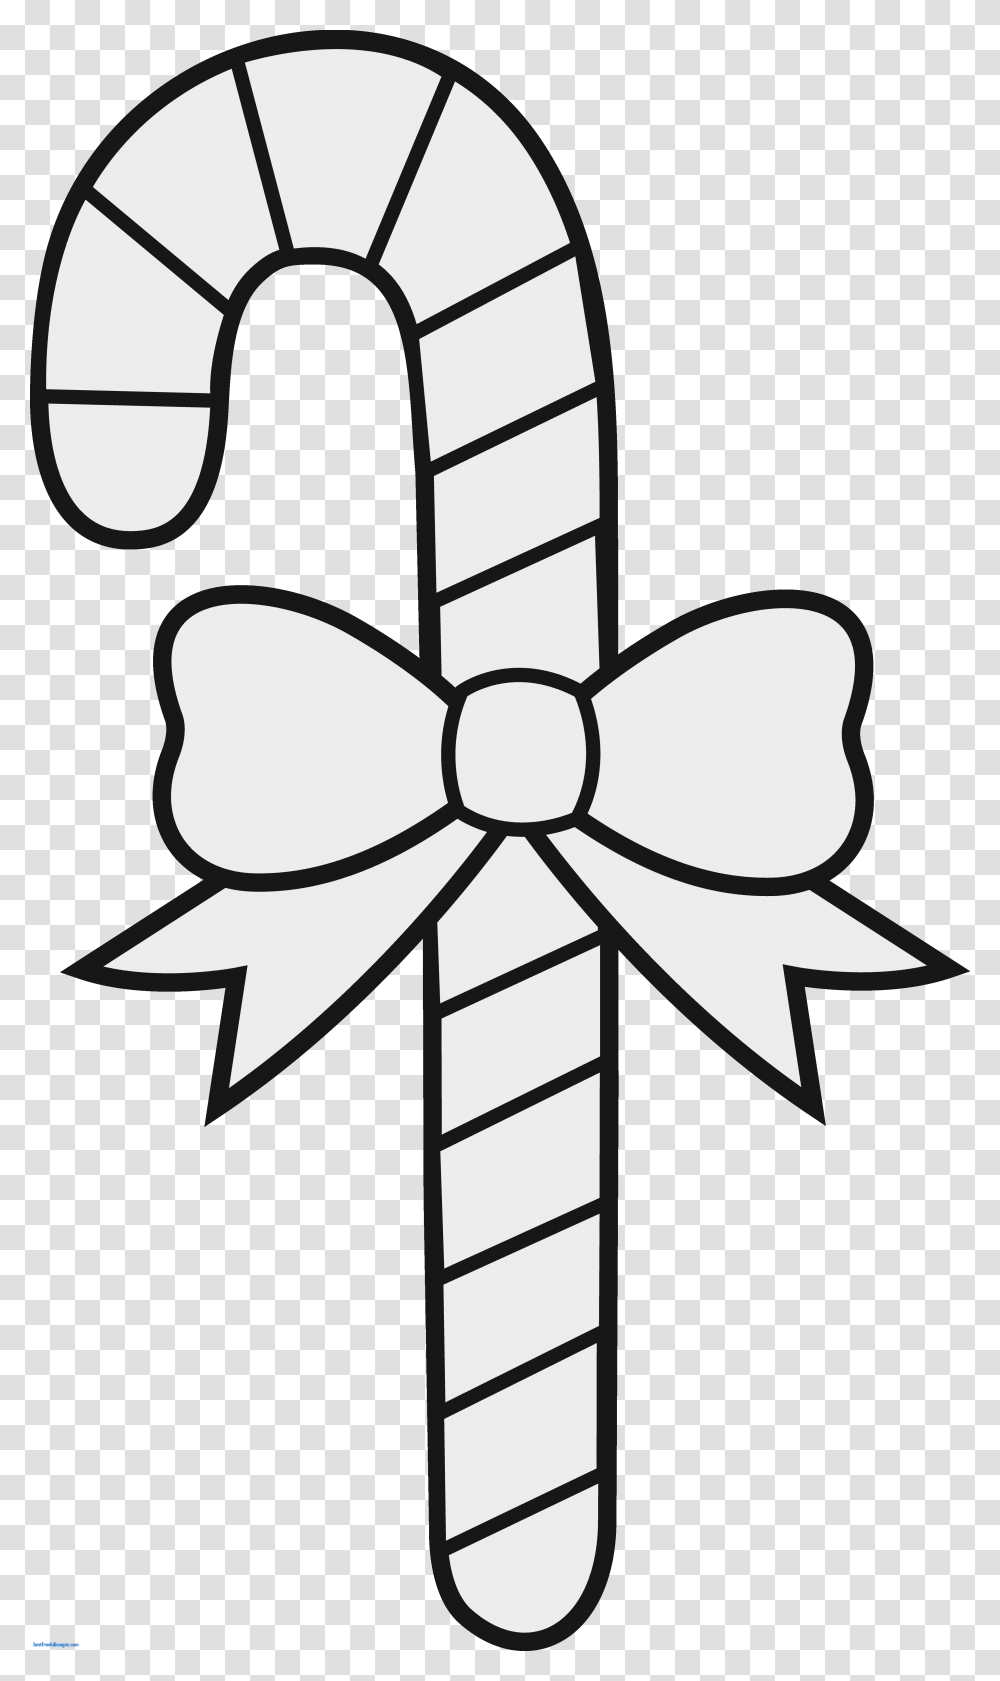 Pinwheel Drawing Black And White Clipart Christmas Drawings Candy Cane, Tie, Accessories, Accessory, Necktie Transparent Png